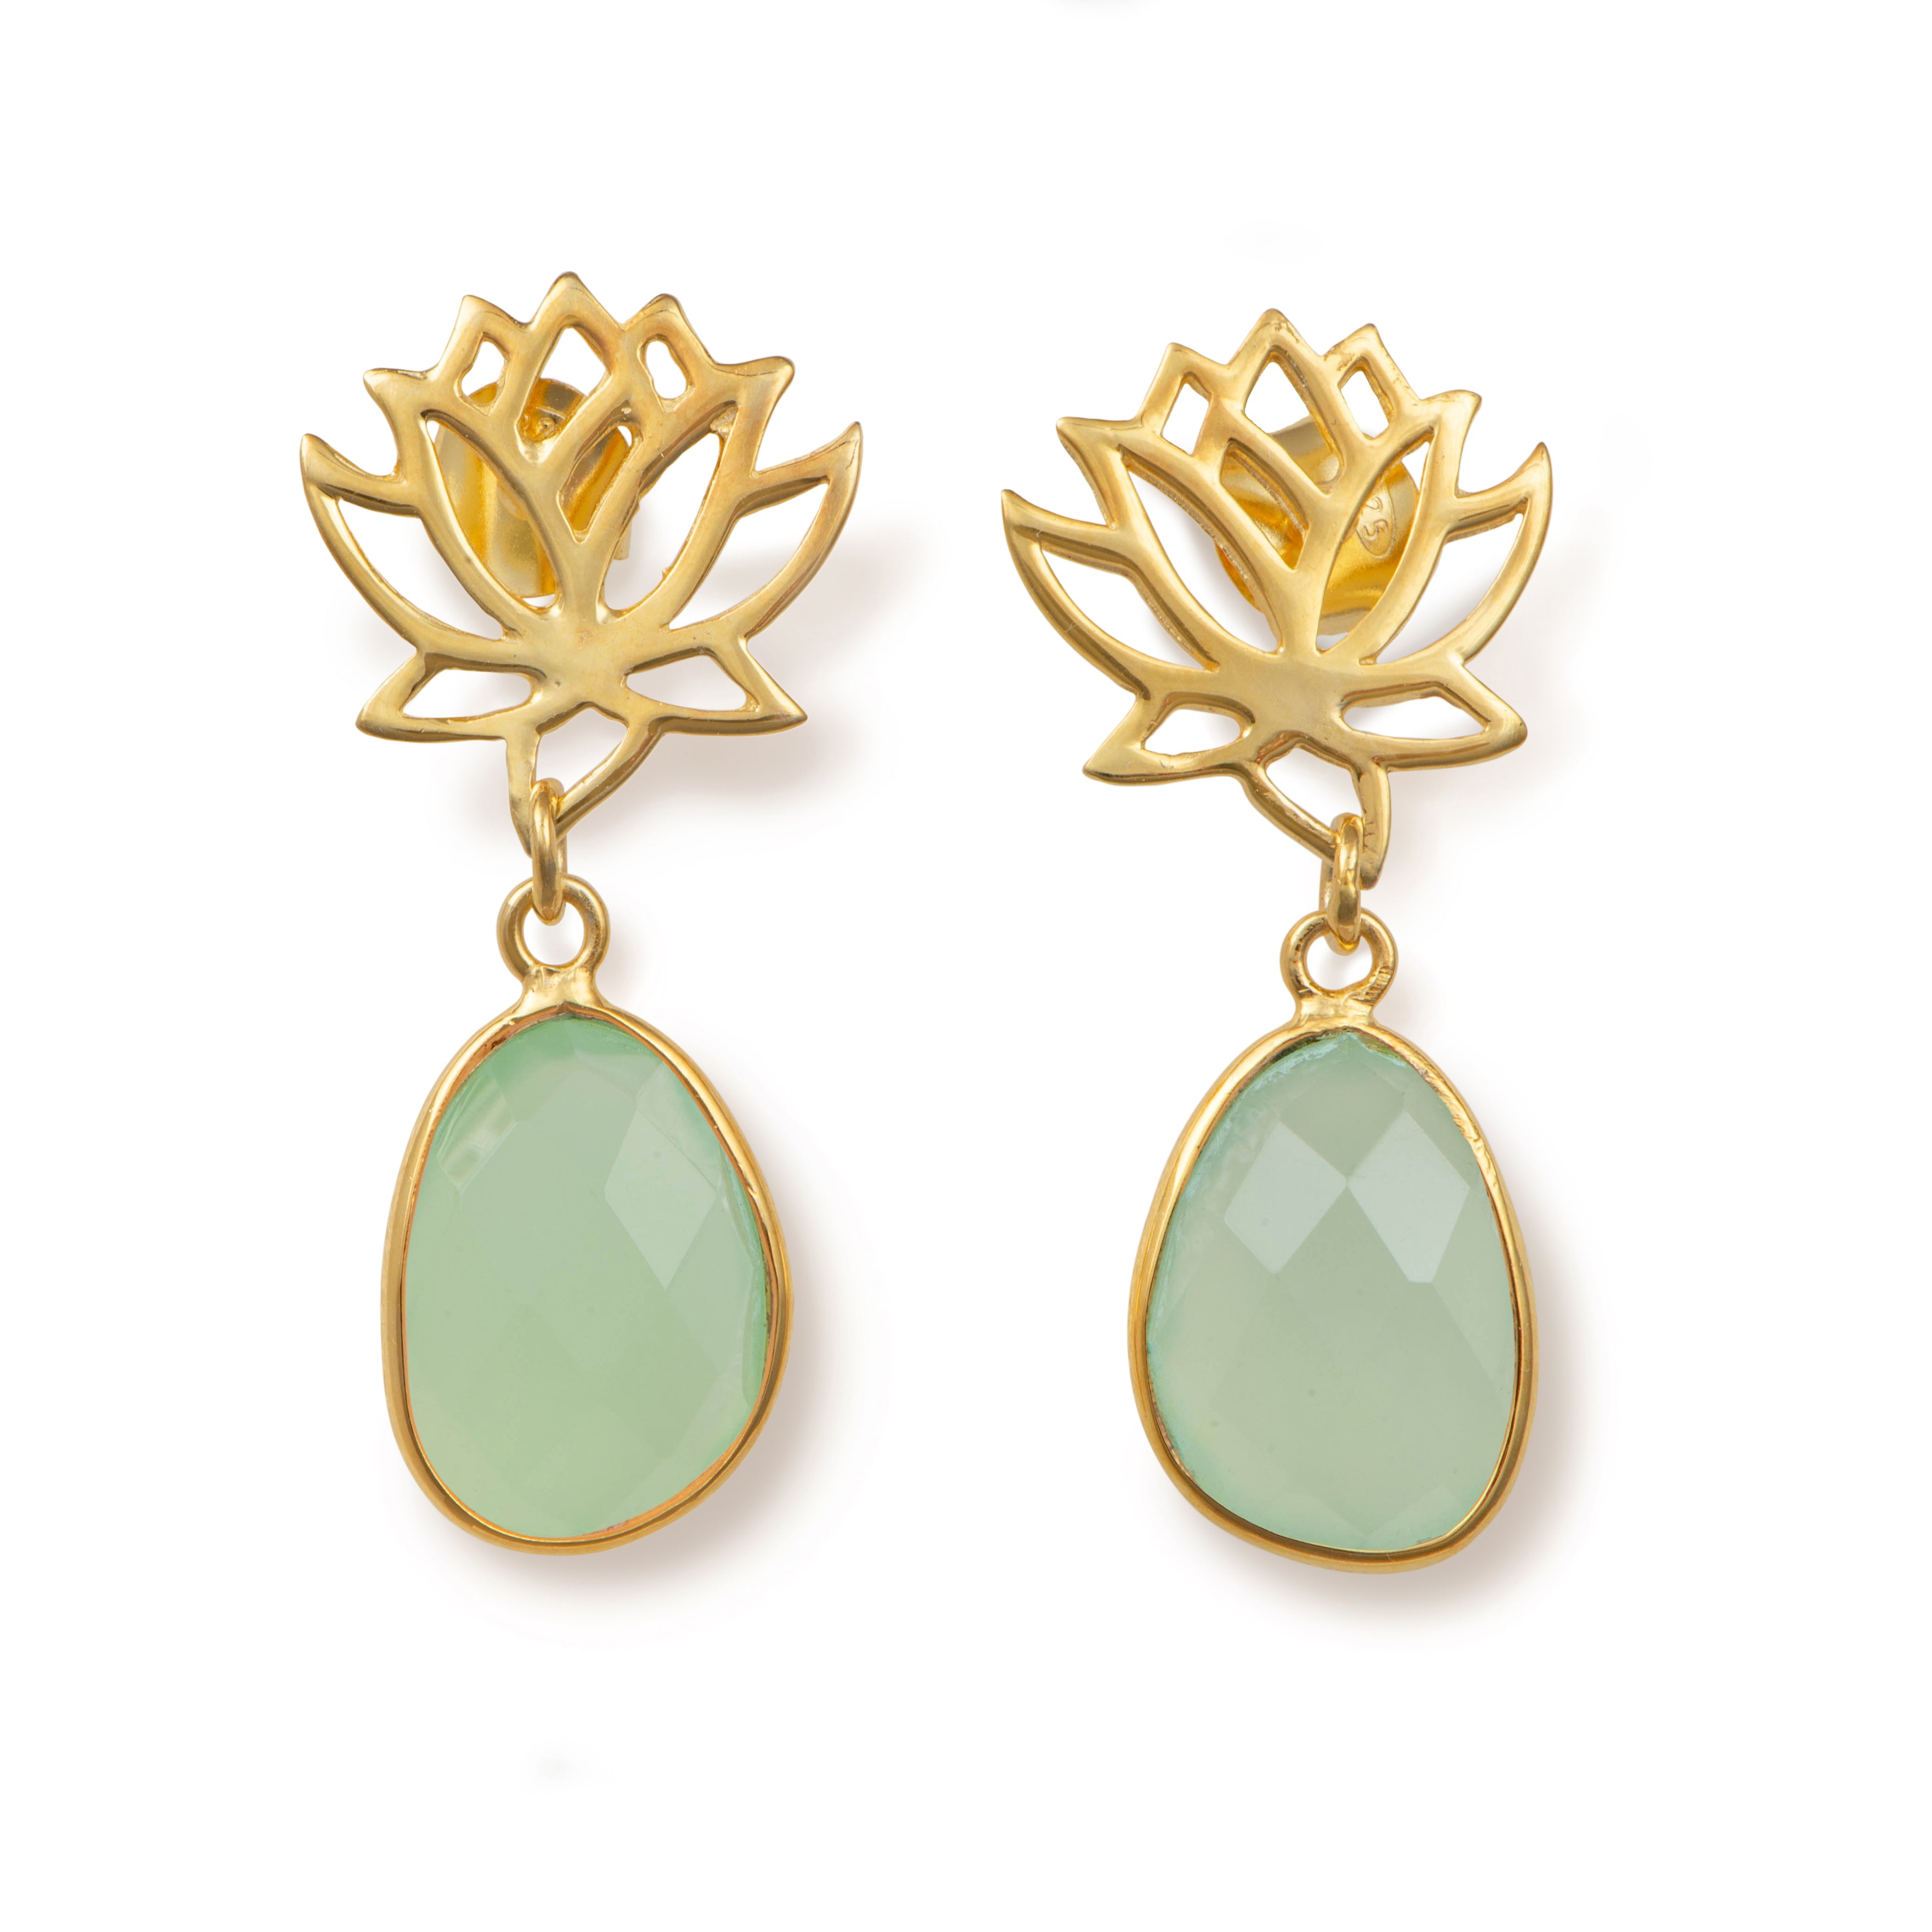 Lotus Earrings in Gold Plated Sterling Silver with a Prehnite Gemstone Drop